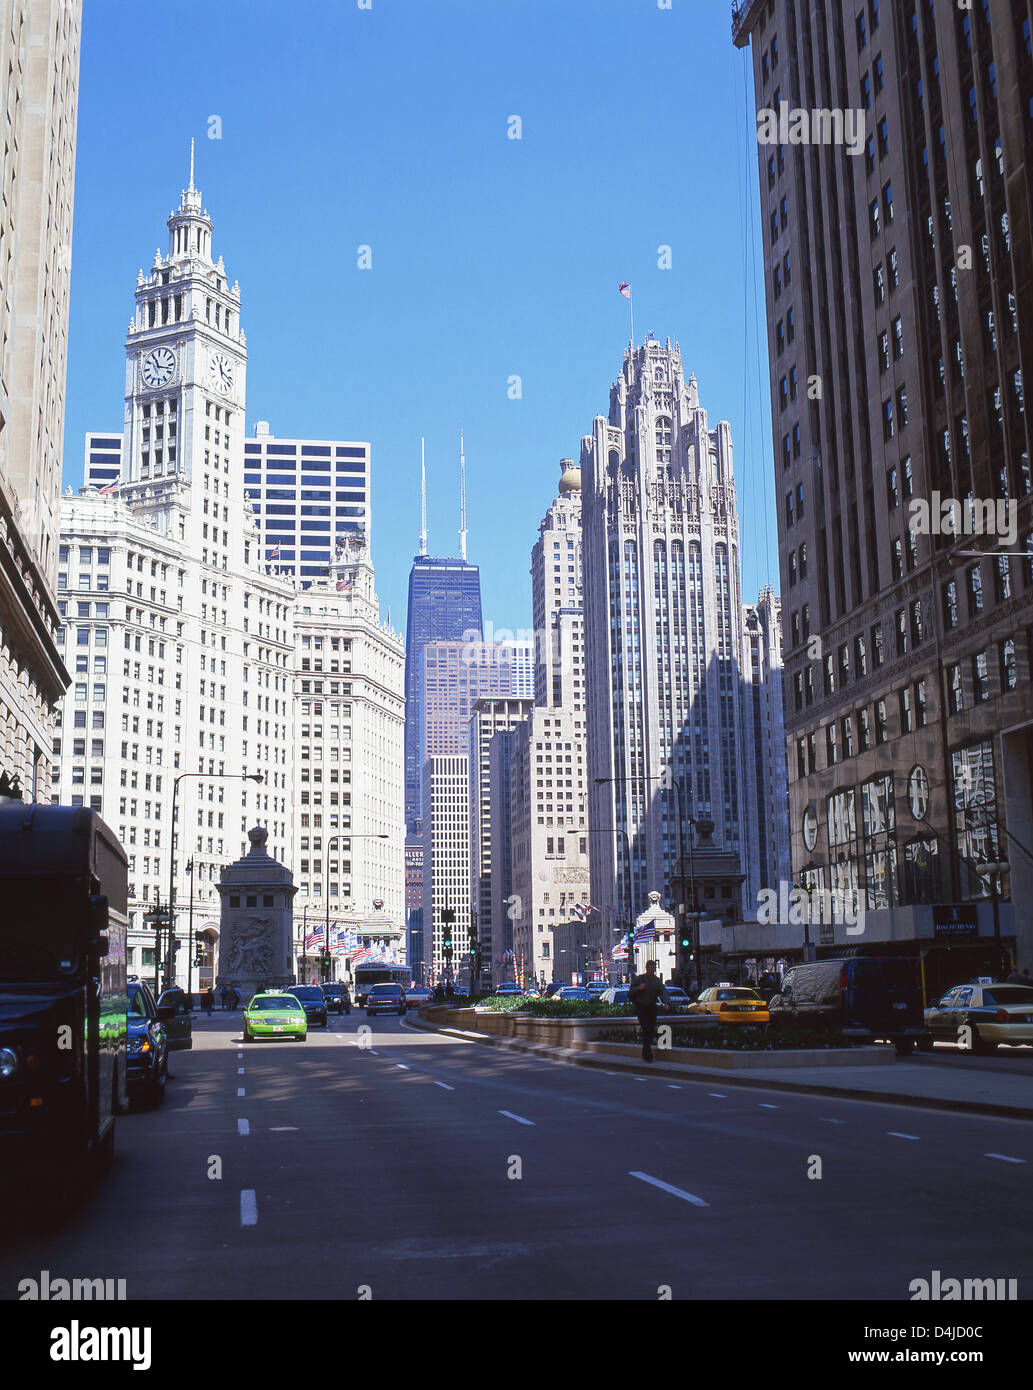 The southern end of the Magnificent Mile, Michigan Avenue, Chicago, Illinois, United States of America Stock Photo